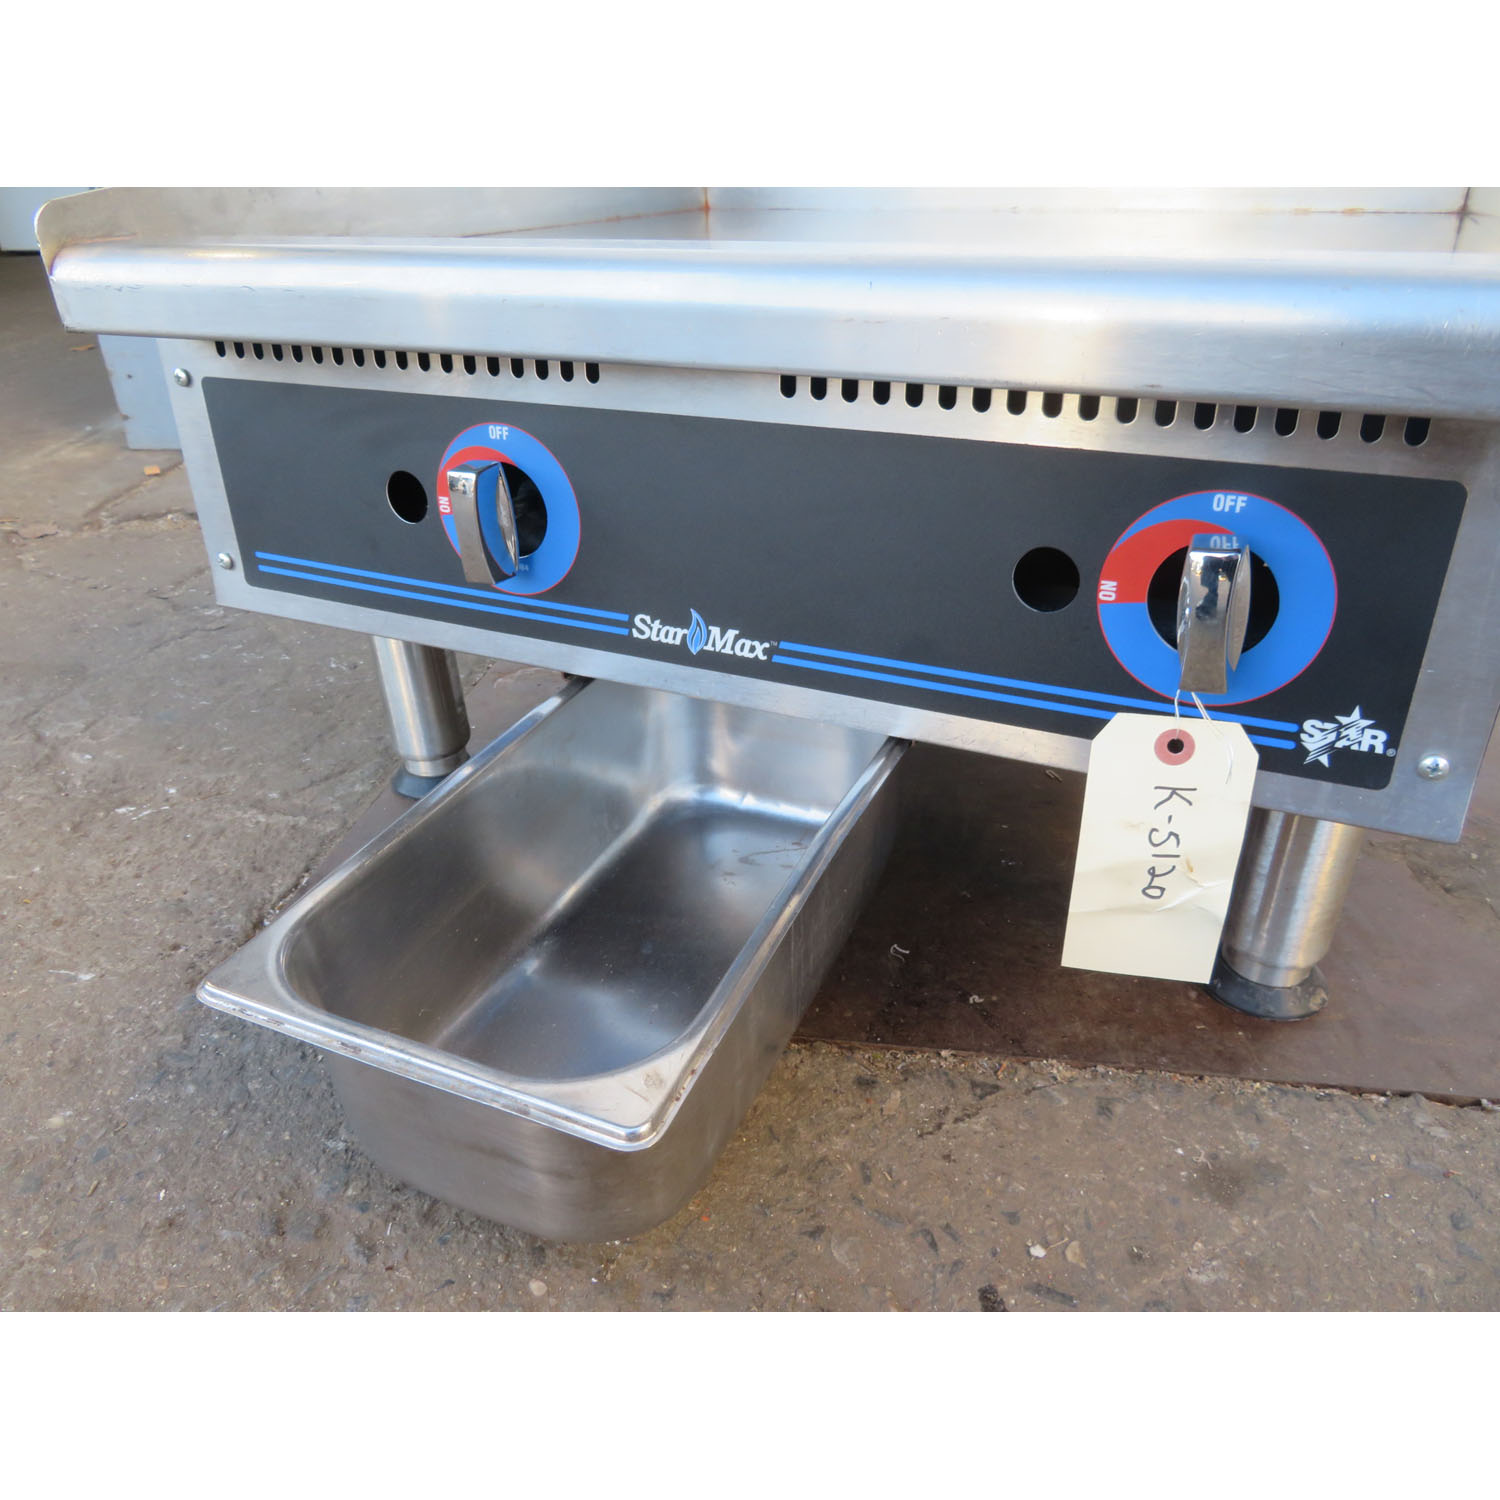 Star Max 624MD, 24 Inch Gas Griddle, Used Very Good Condition image 2